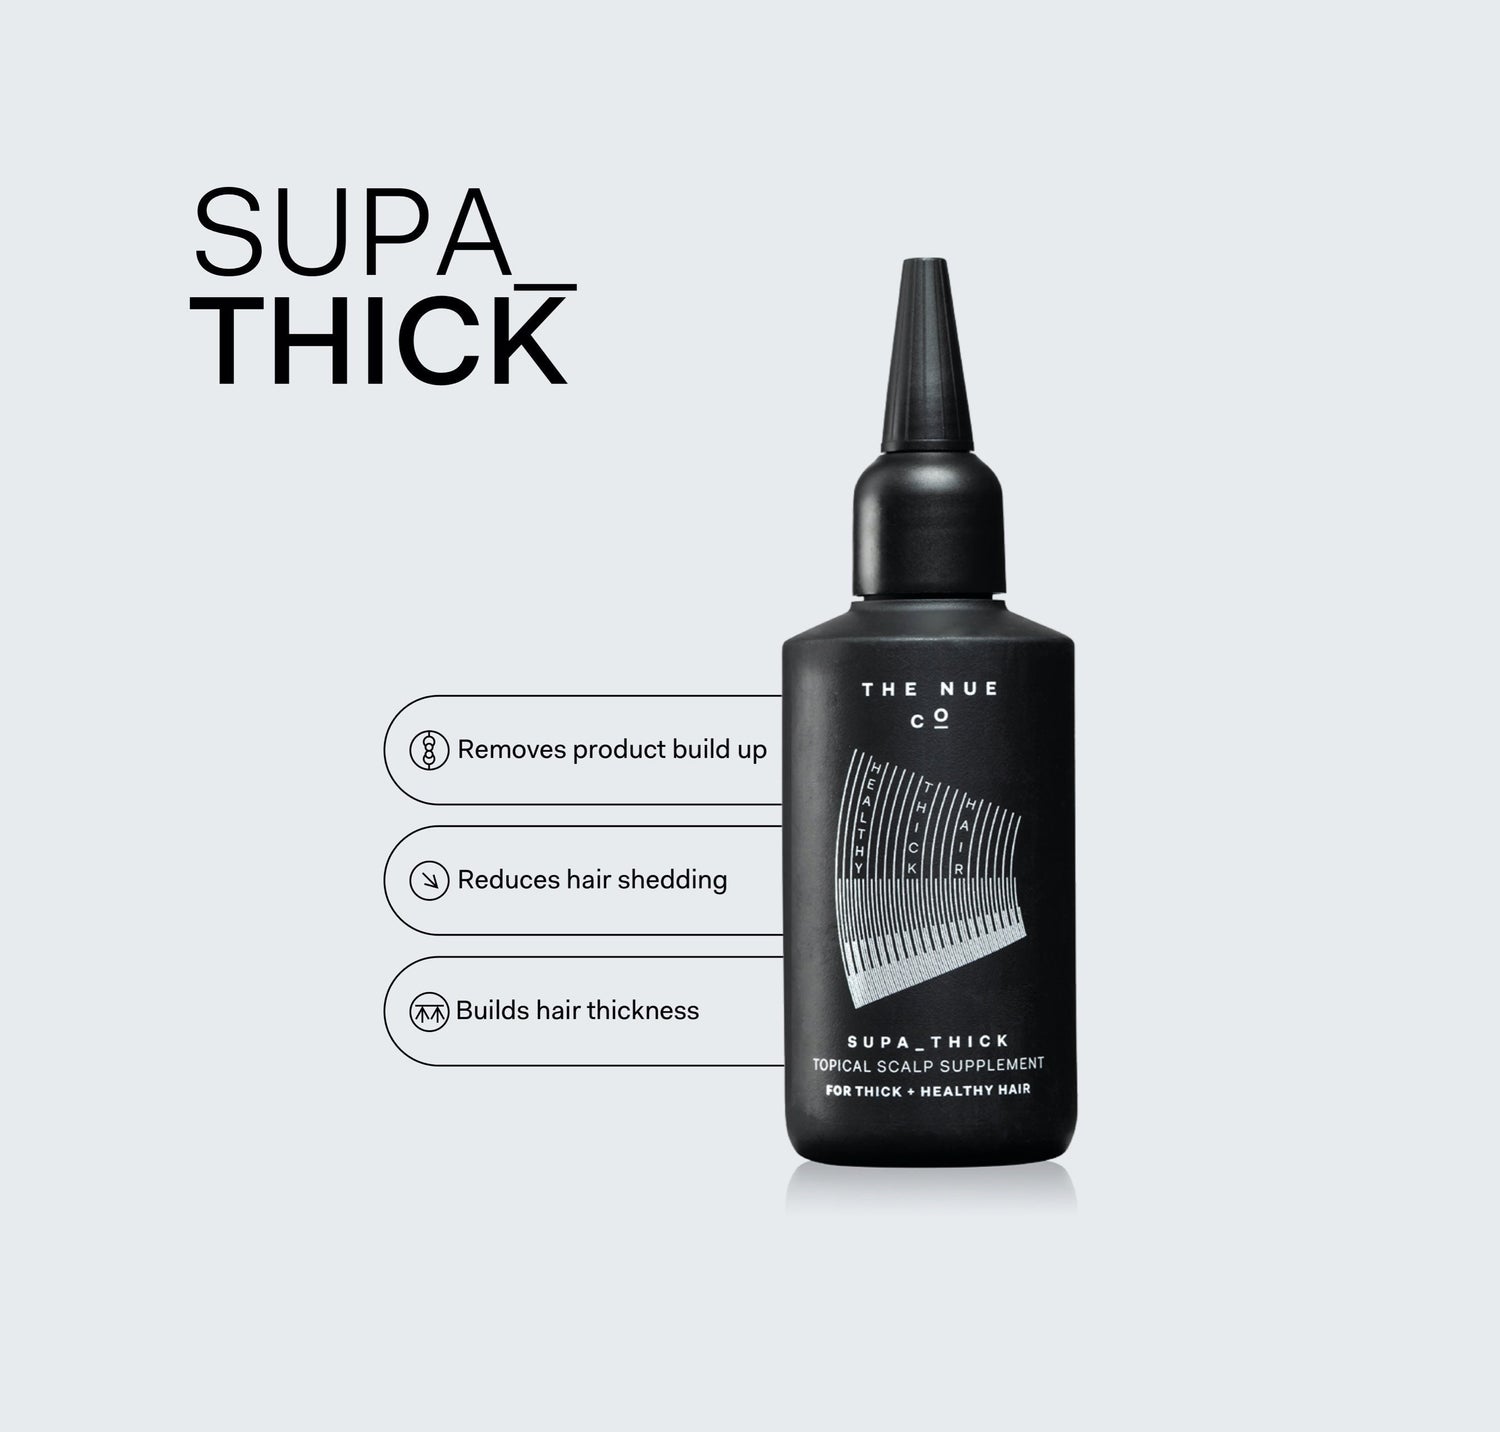 SUPA_THICK 3 Month Subscription Only The Nue Co. 